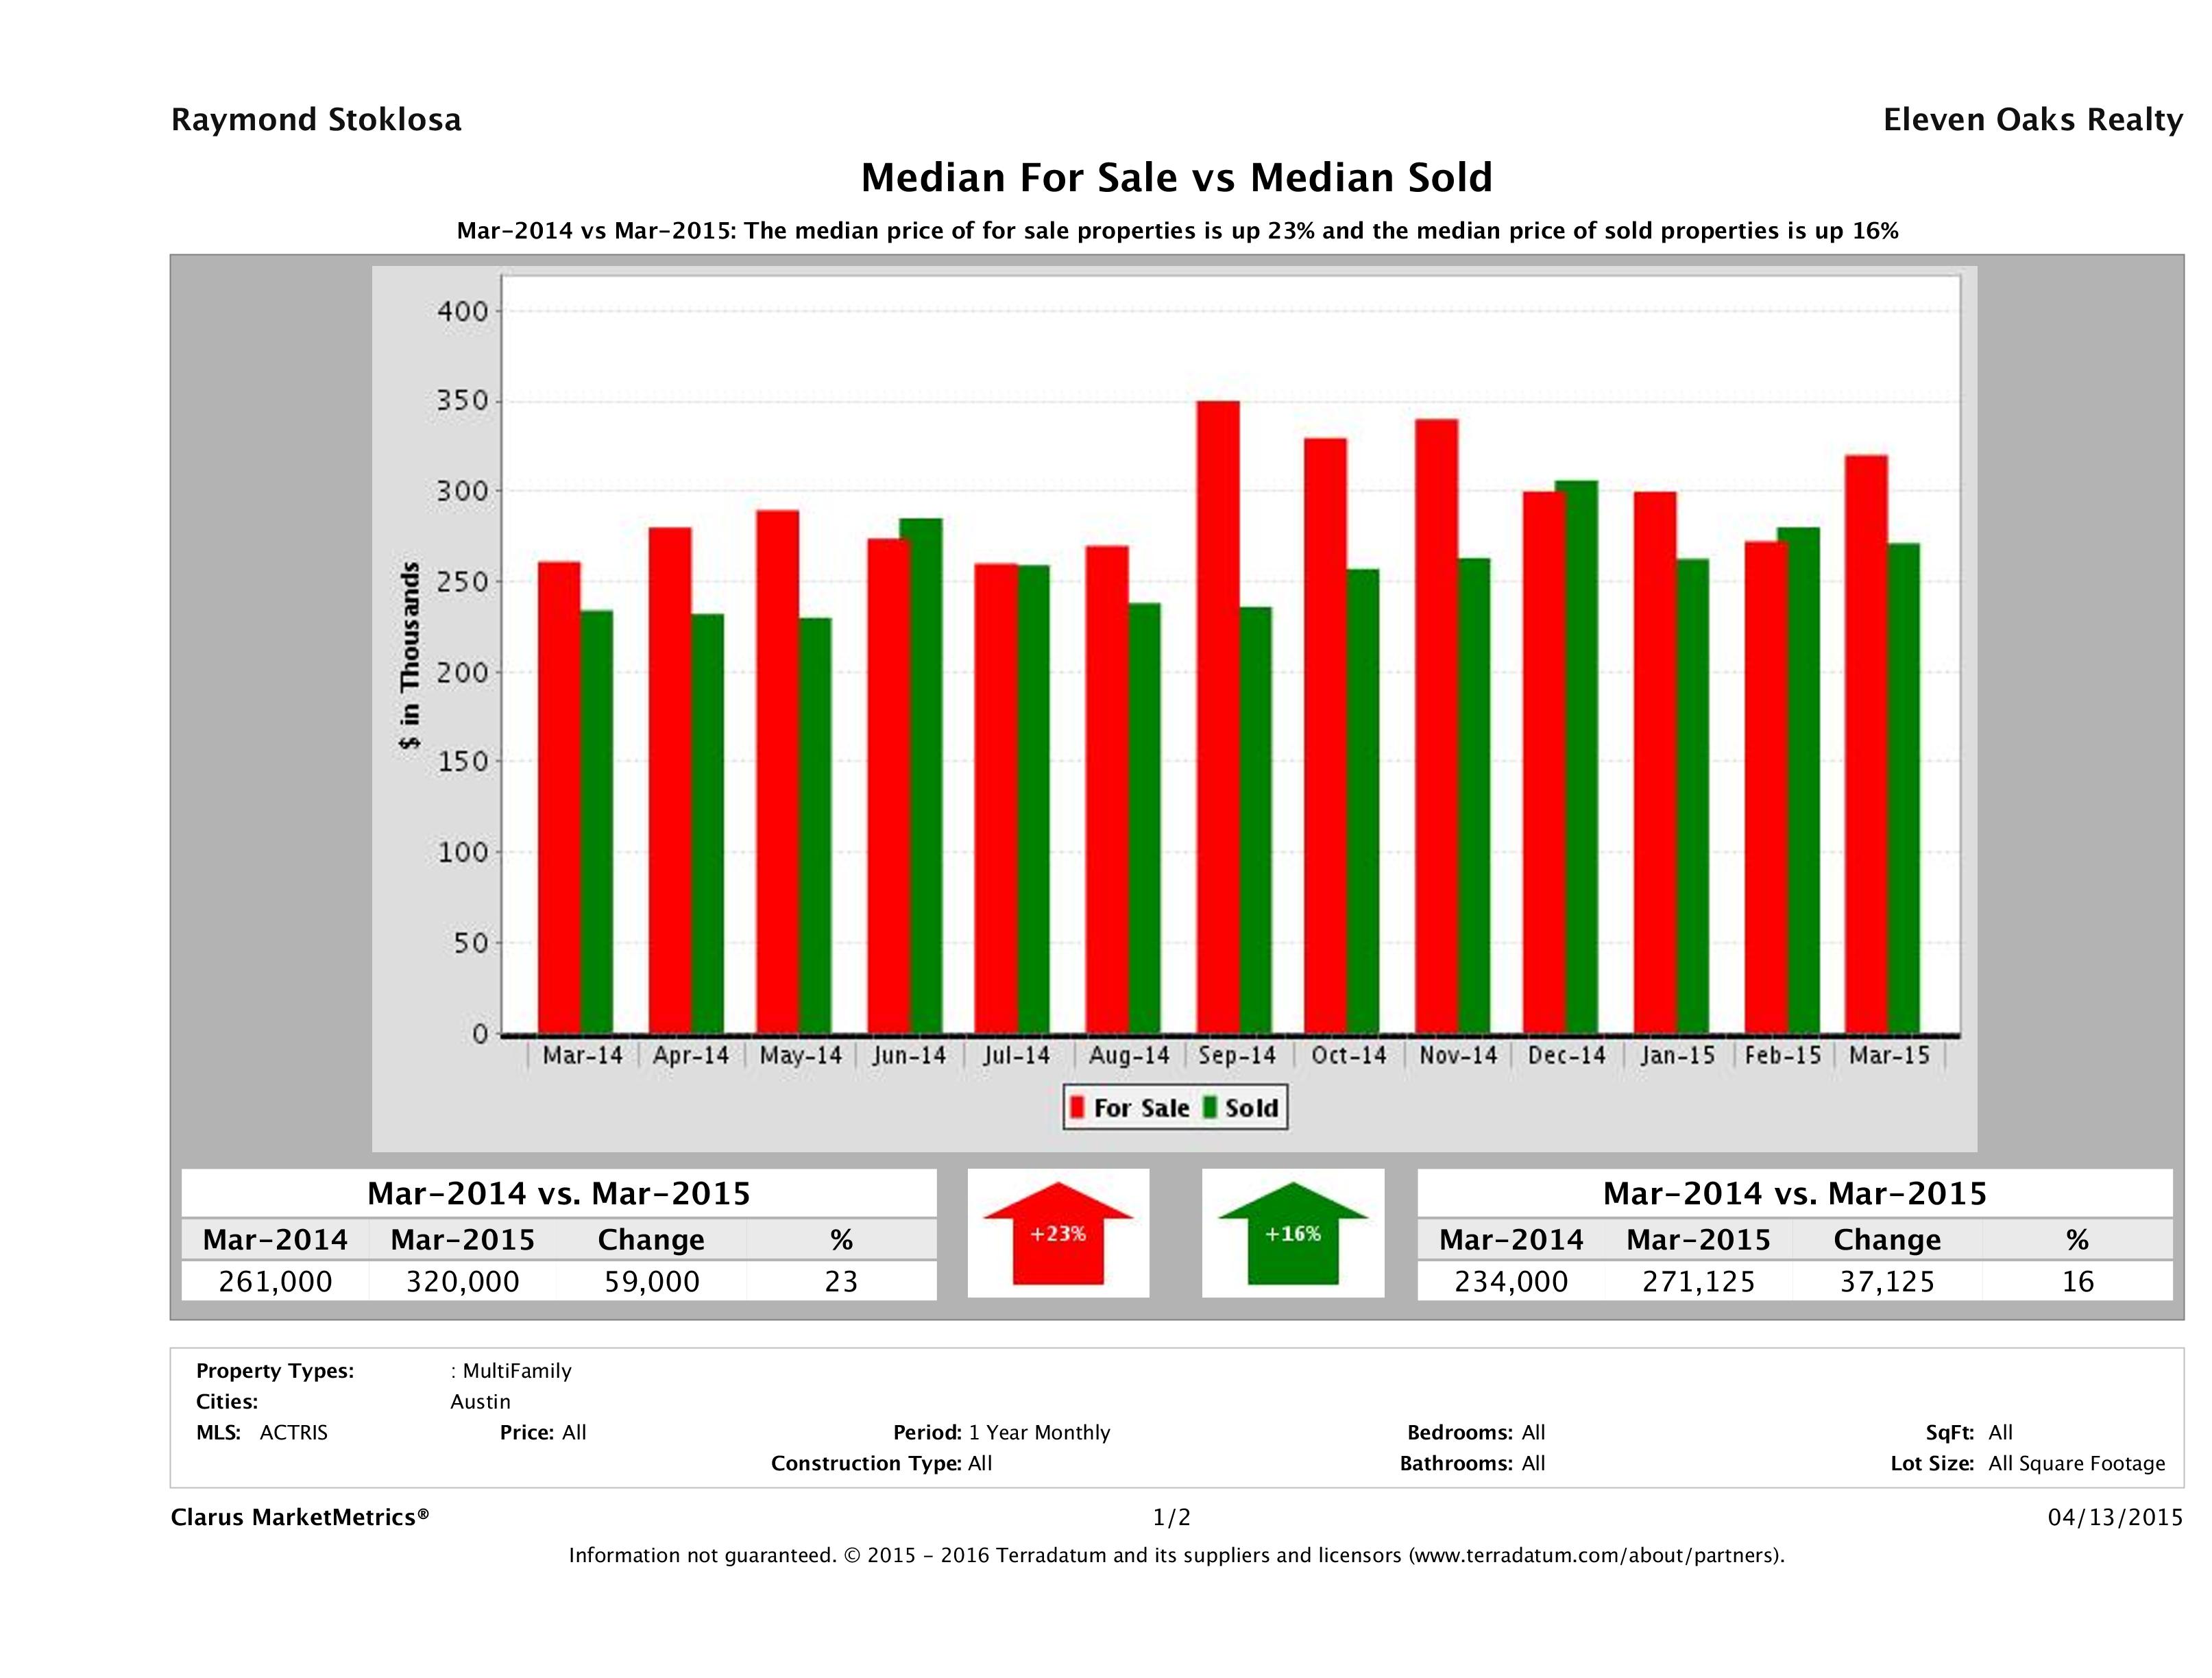 Austin multi family property pricing equilibrium March 2015